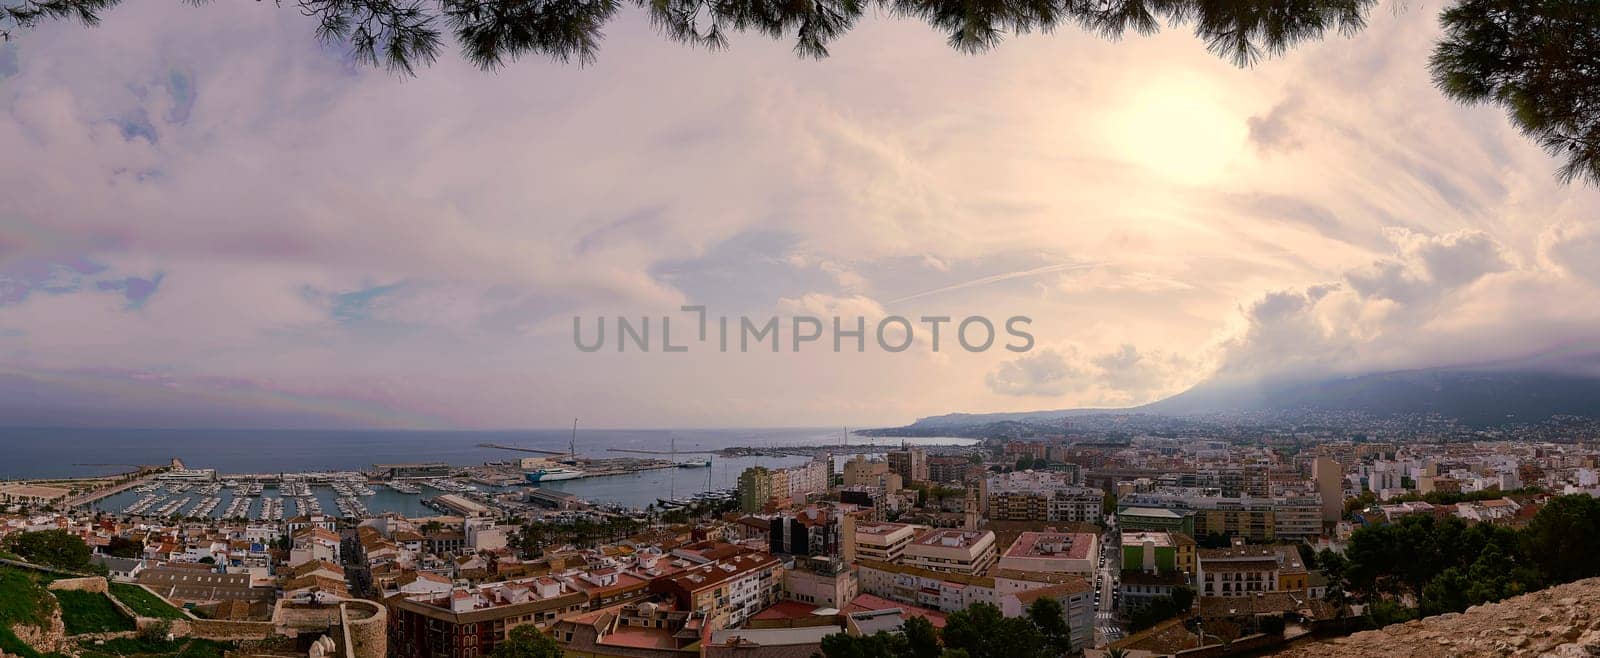 igh-resolution panoramic photograph showcasing the stunning coastal city of Denia, Spain, bathed in warm sunlight and adorned with fluffy clouds against a clear blue sky.